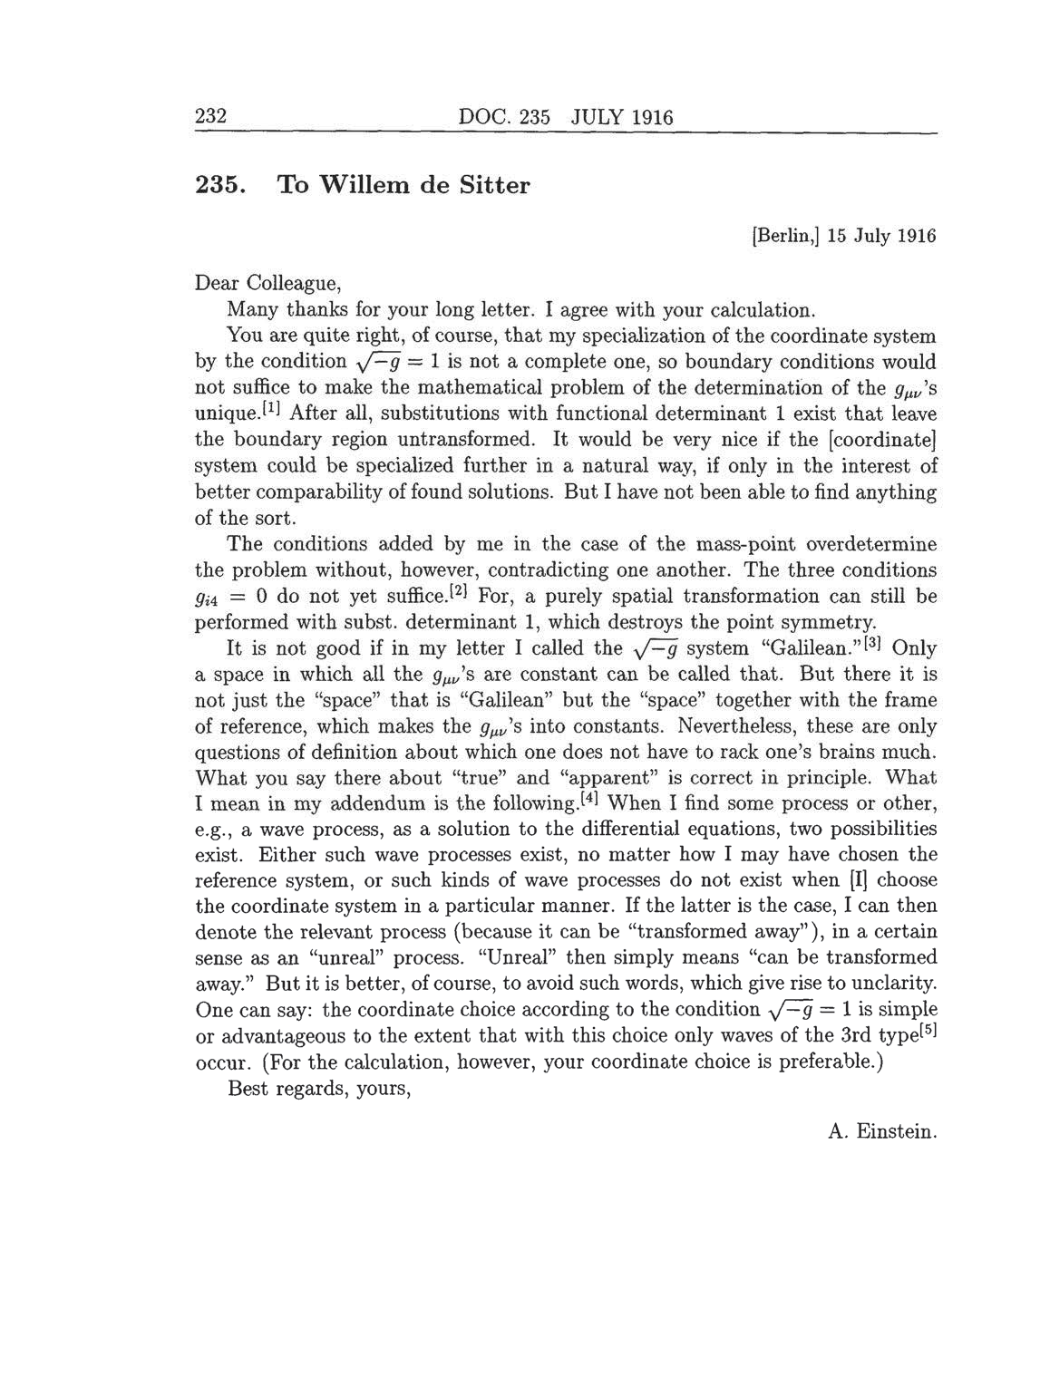 Volume 8: The Berlin Years: Correspondence, 1914-1918 (English translation supplement) page 232